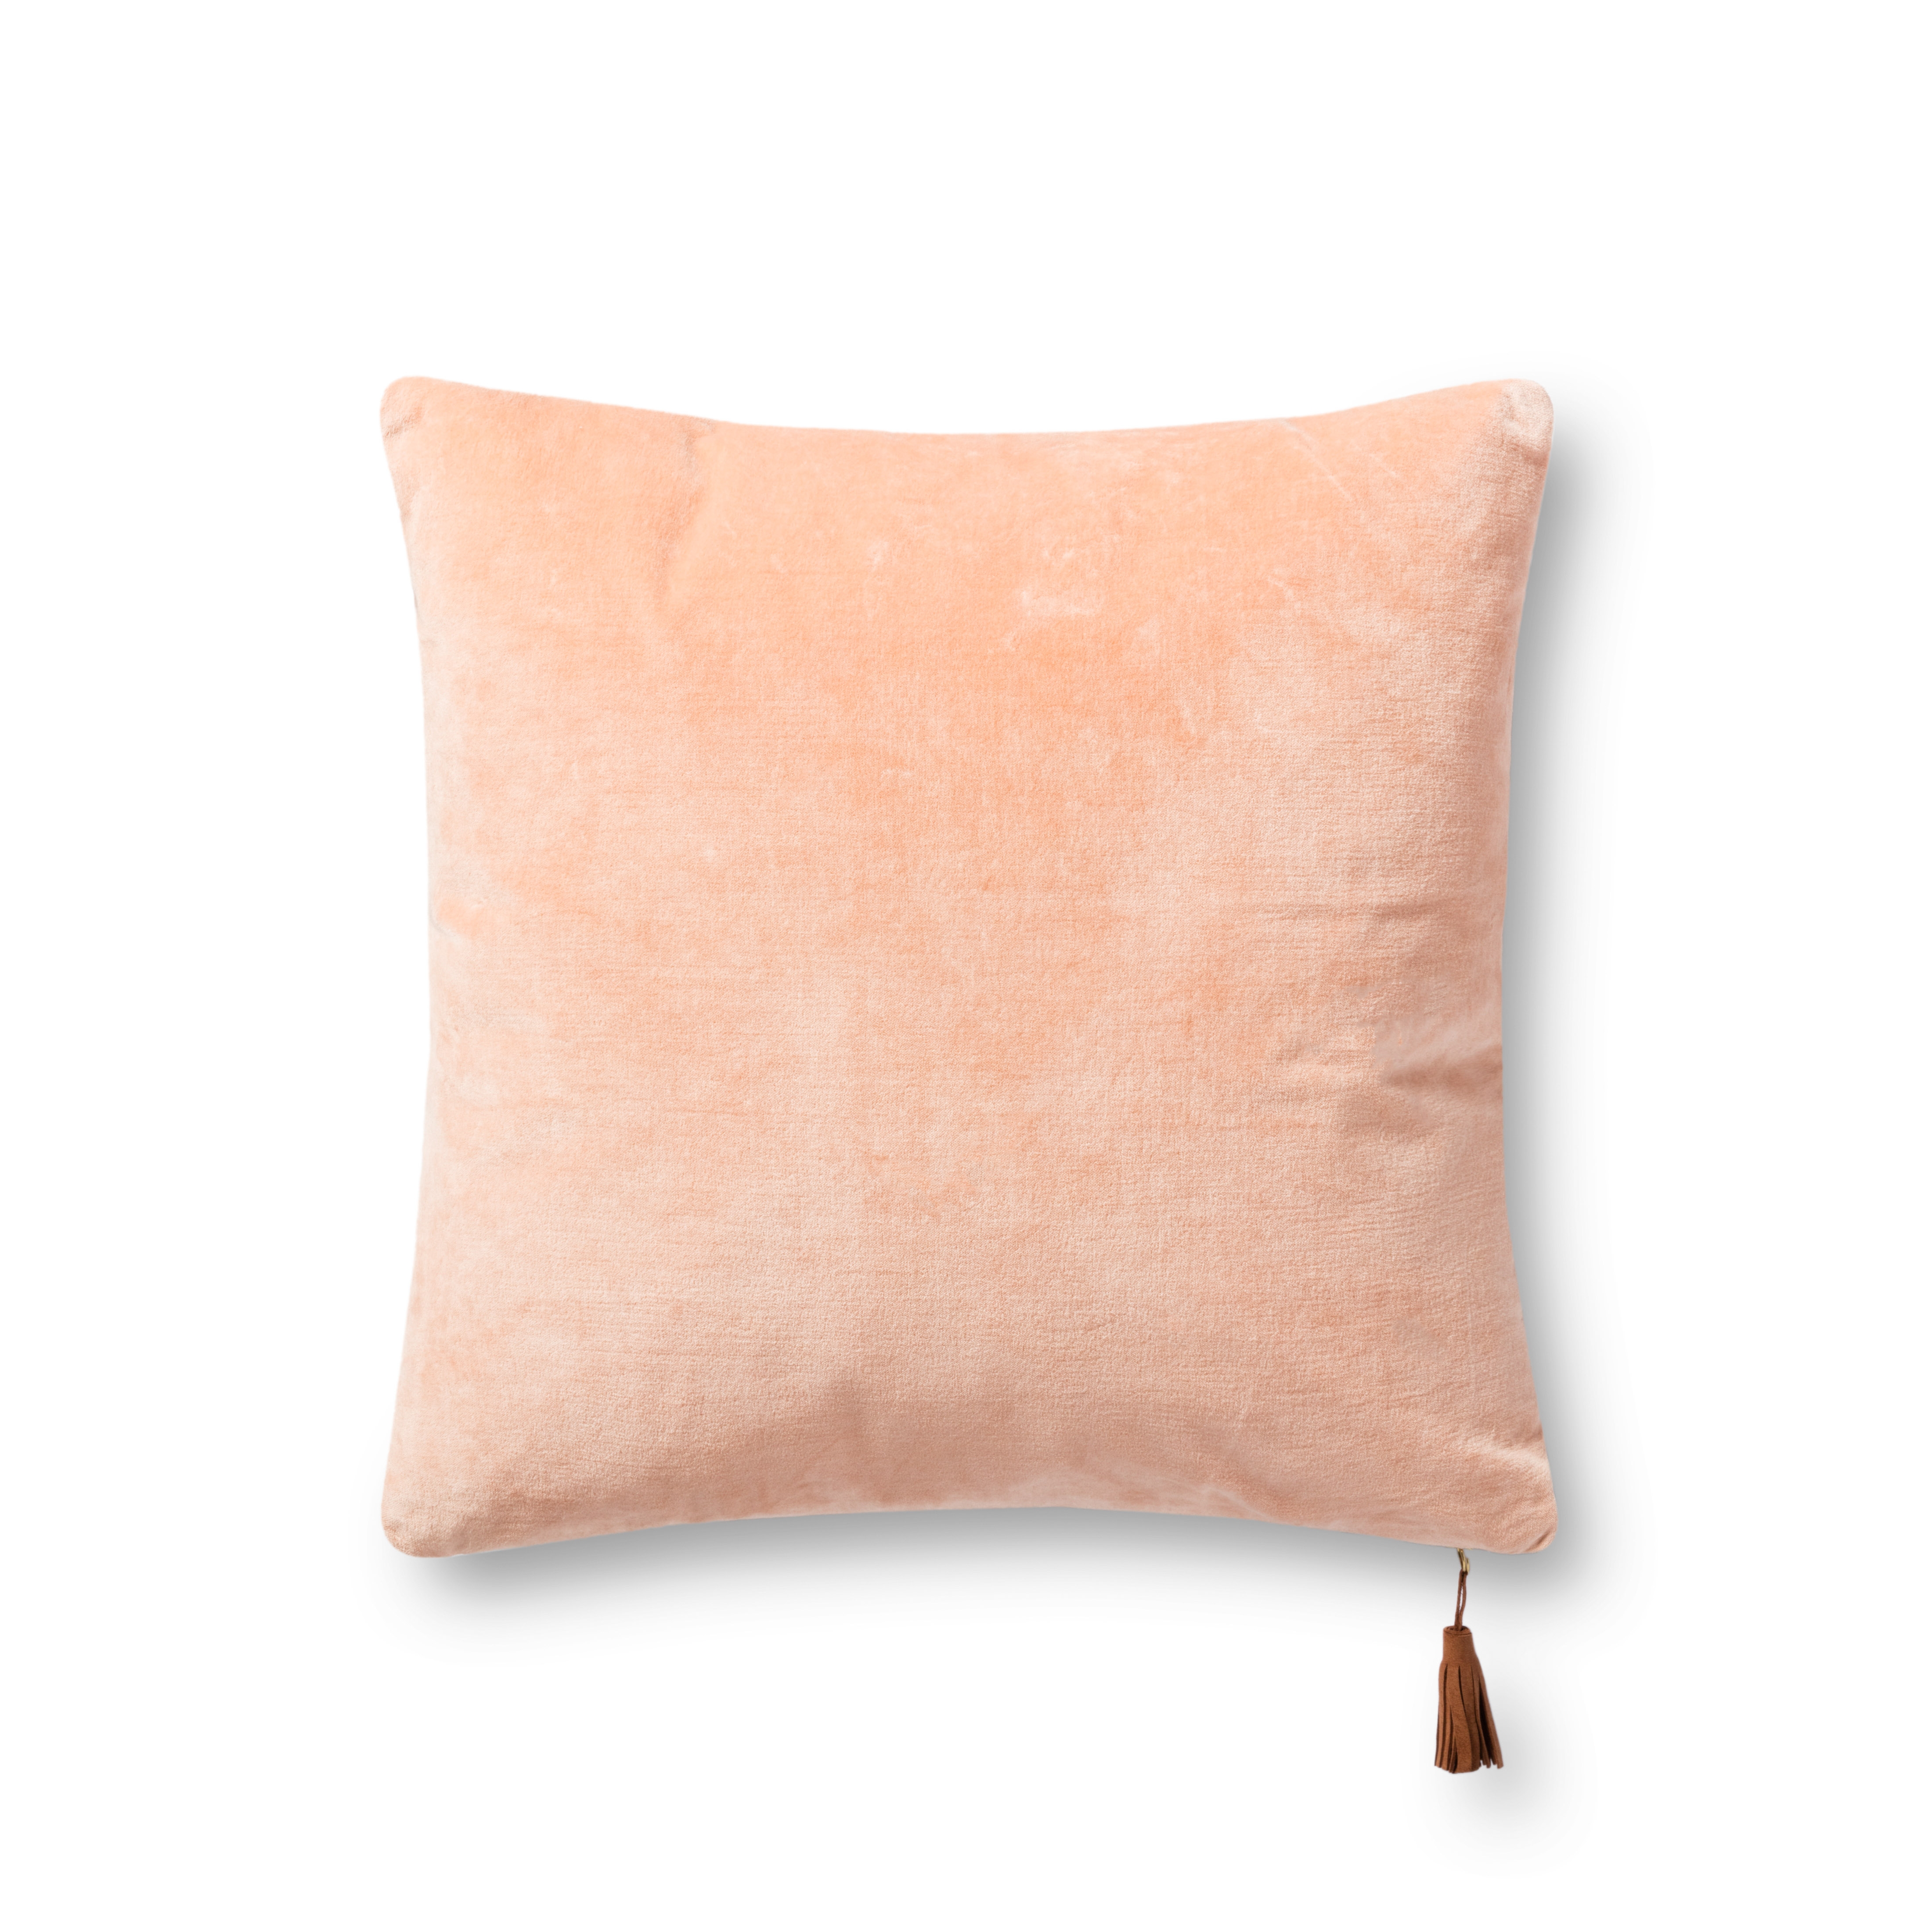 Magnolia Home by Joanna Gaines x Loloi Pillows P1153 Coral / Gold 18" x 18" Cover Only - Image 0